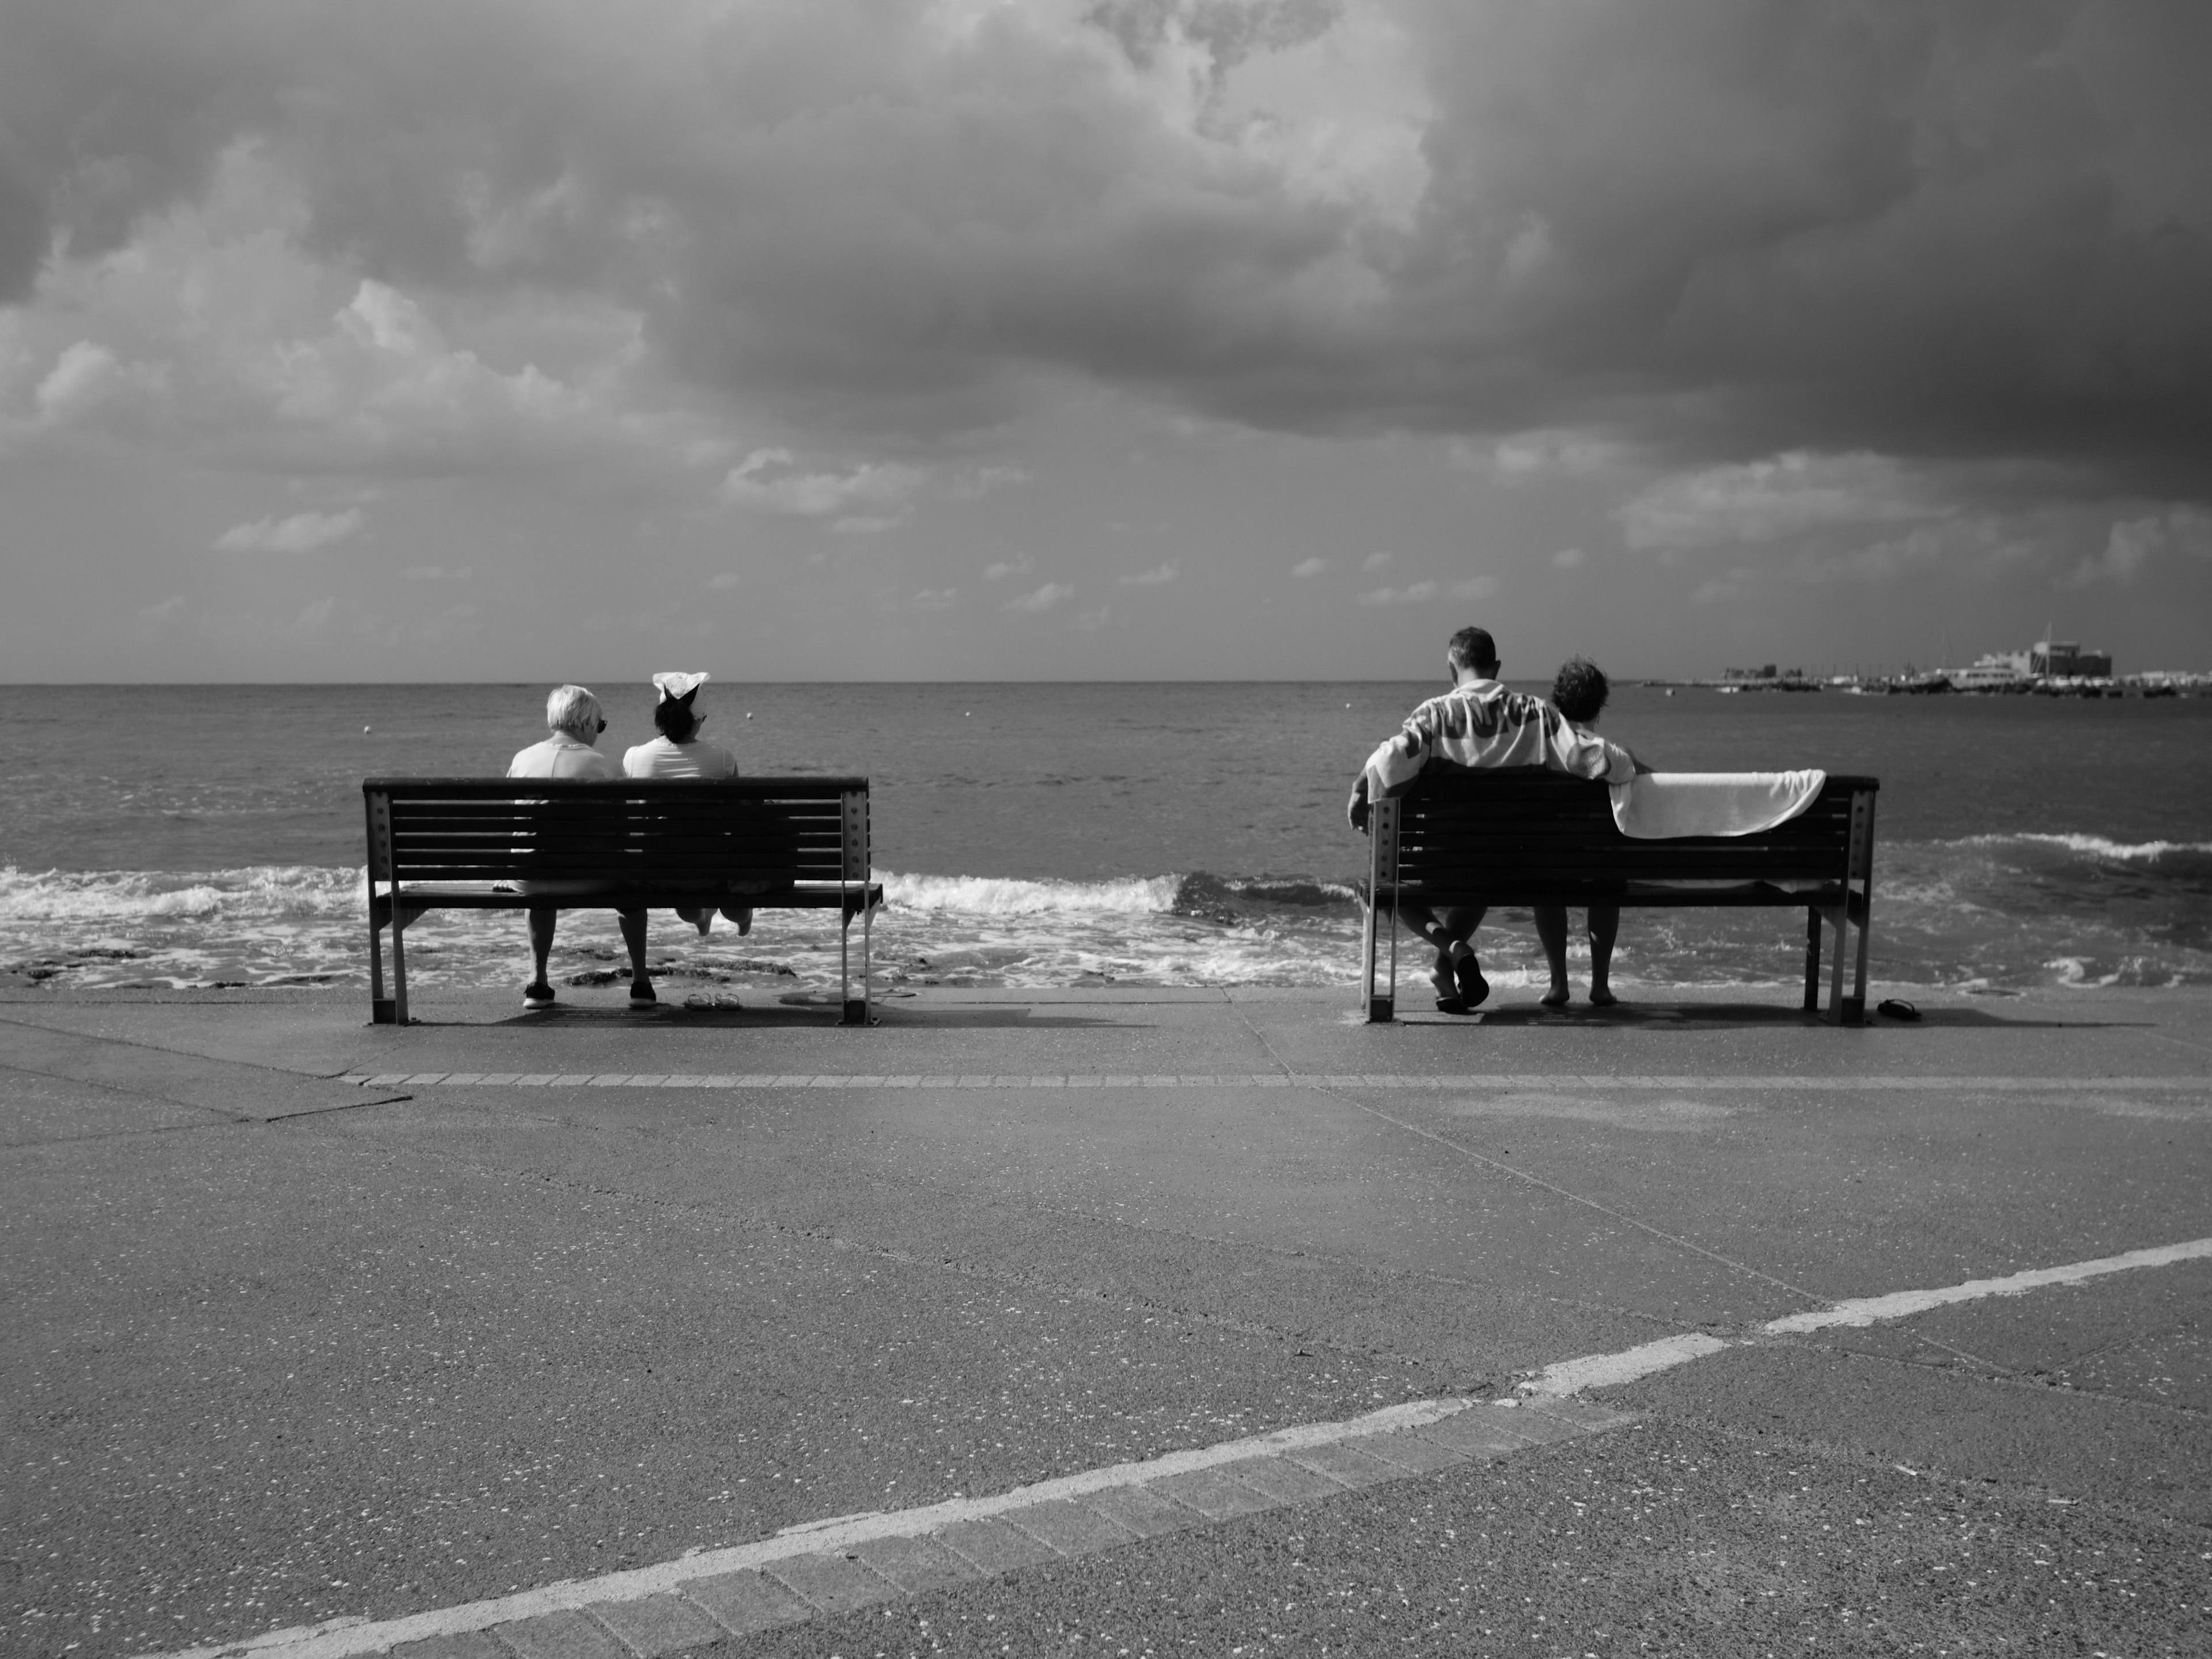 Two sets of couples on respective benches looking out to sea